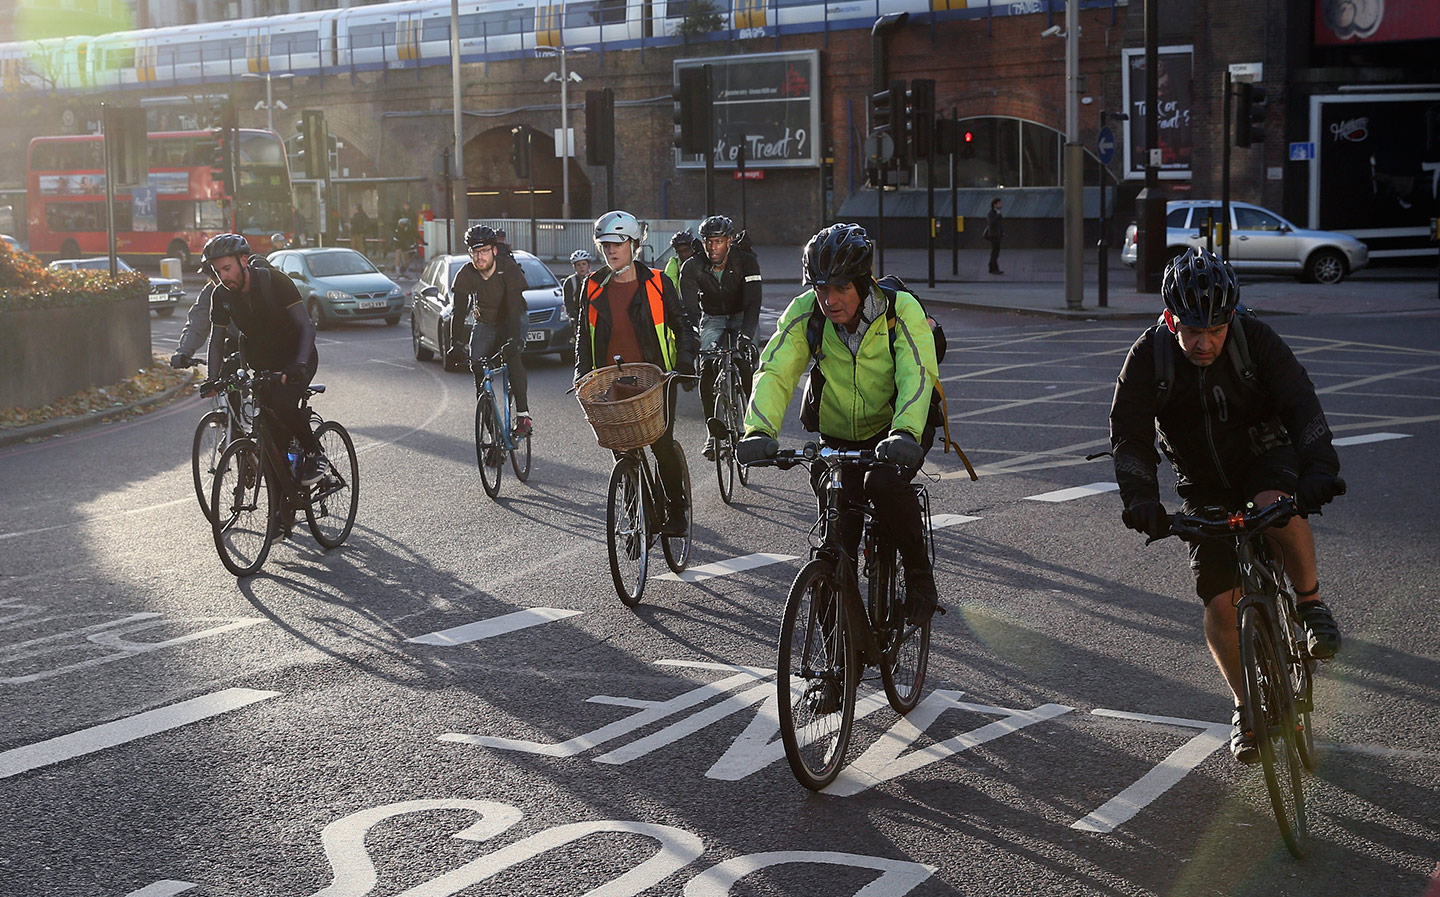 Compulsory helmets and hi-vis vests under review for all cyclists on British roads